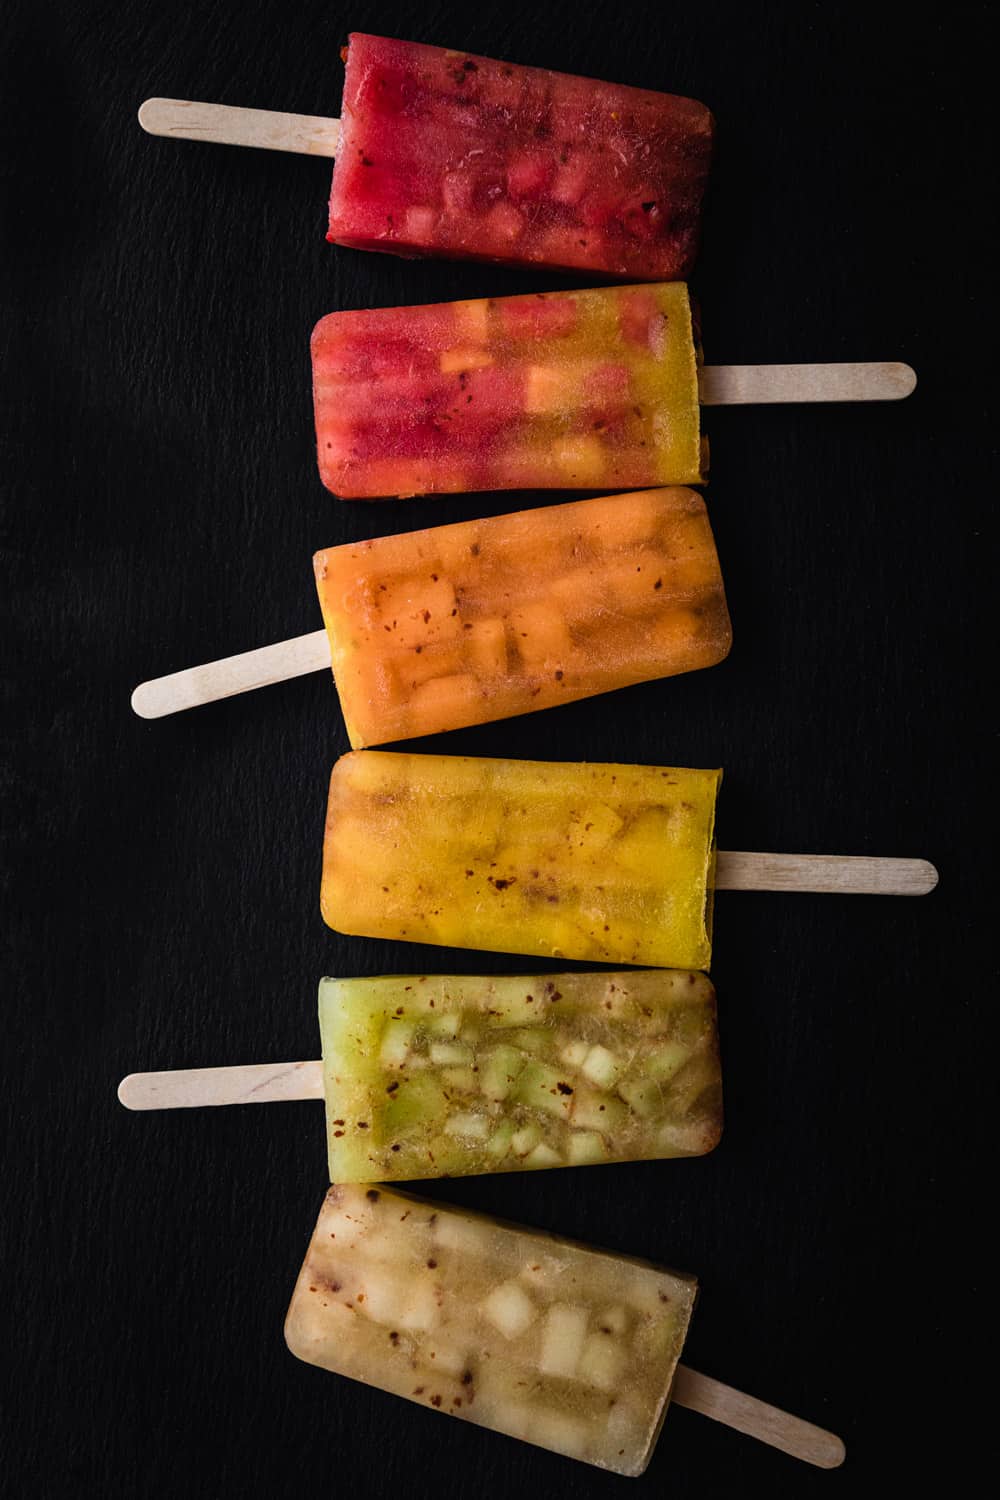 5 melon popsicles in red, orange, yellow, green white and mixed colors lined up on a black background; overhead shot